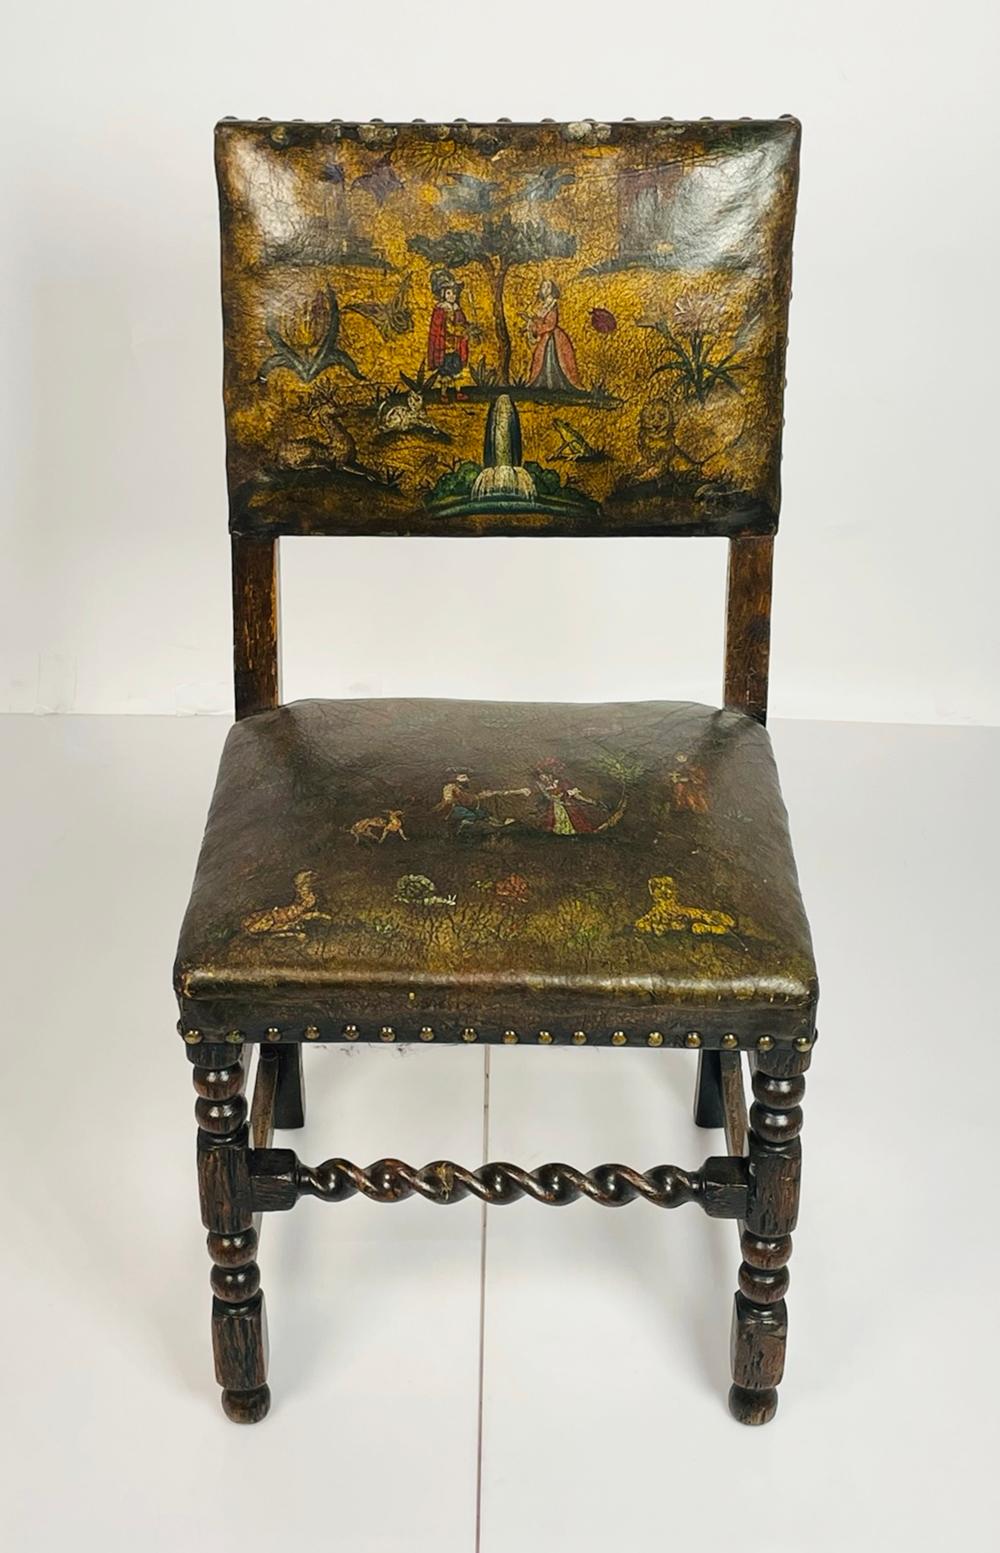 French Provincial Antique Leather & Wood Chair With Painting on Seat & Backrest, Made in France